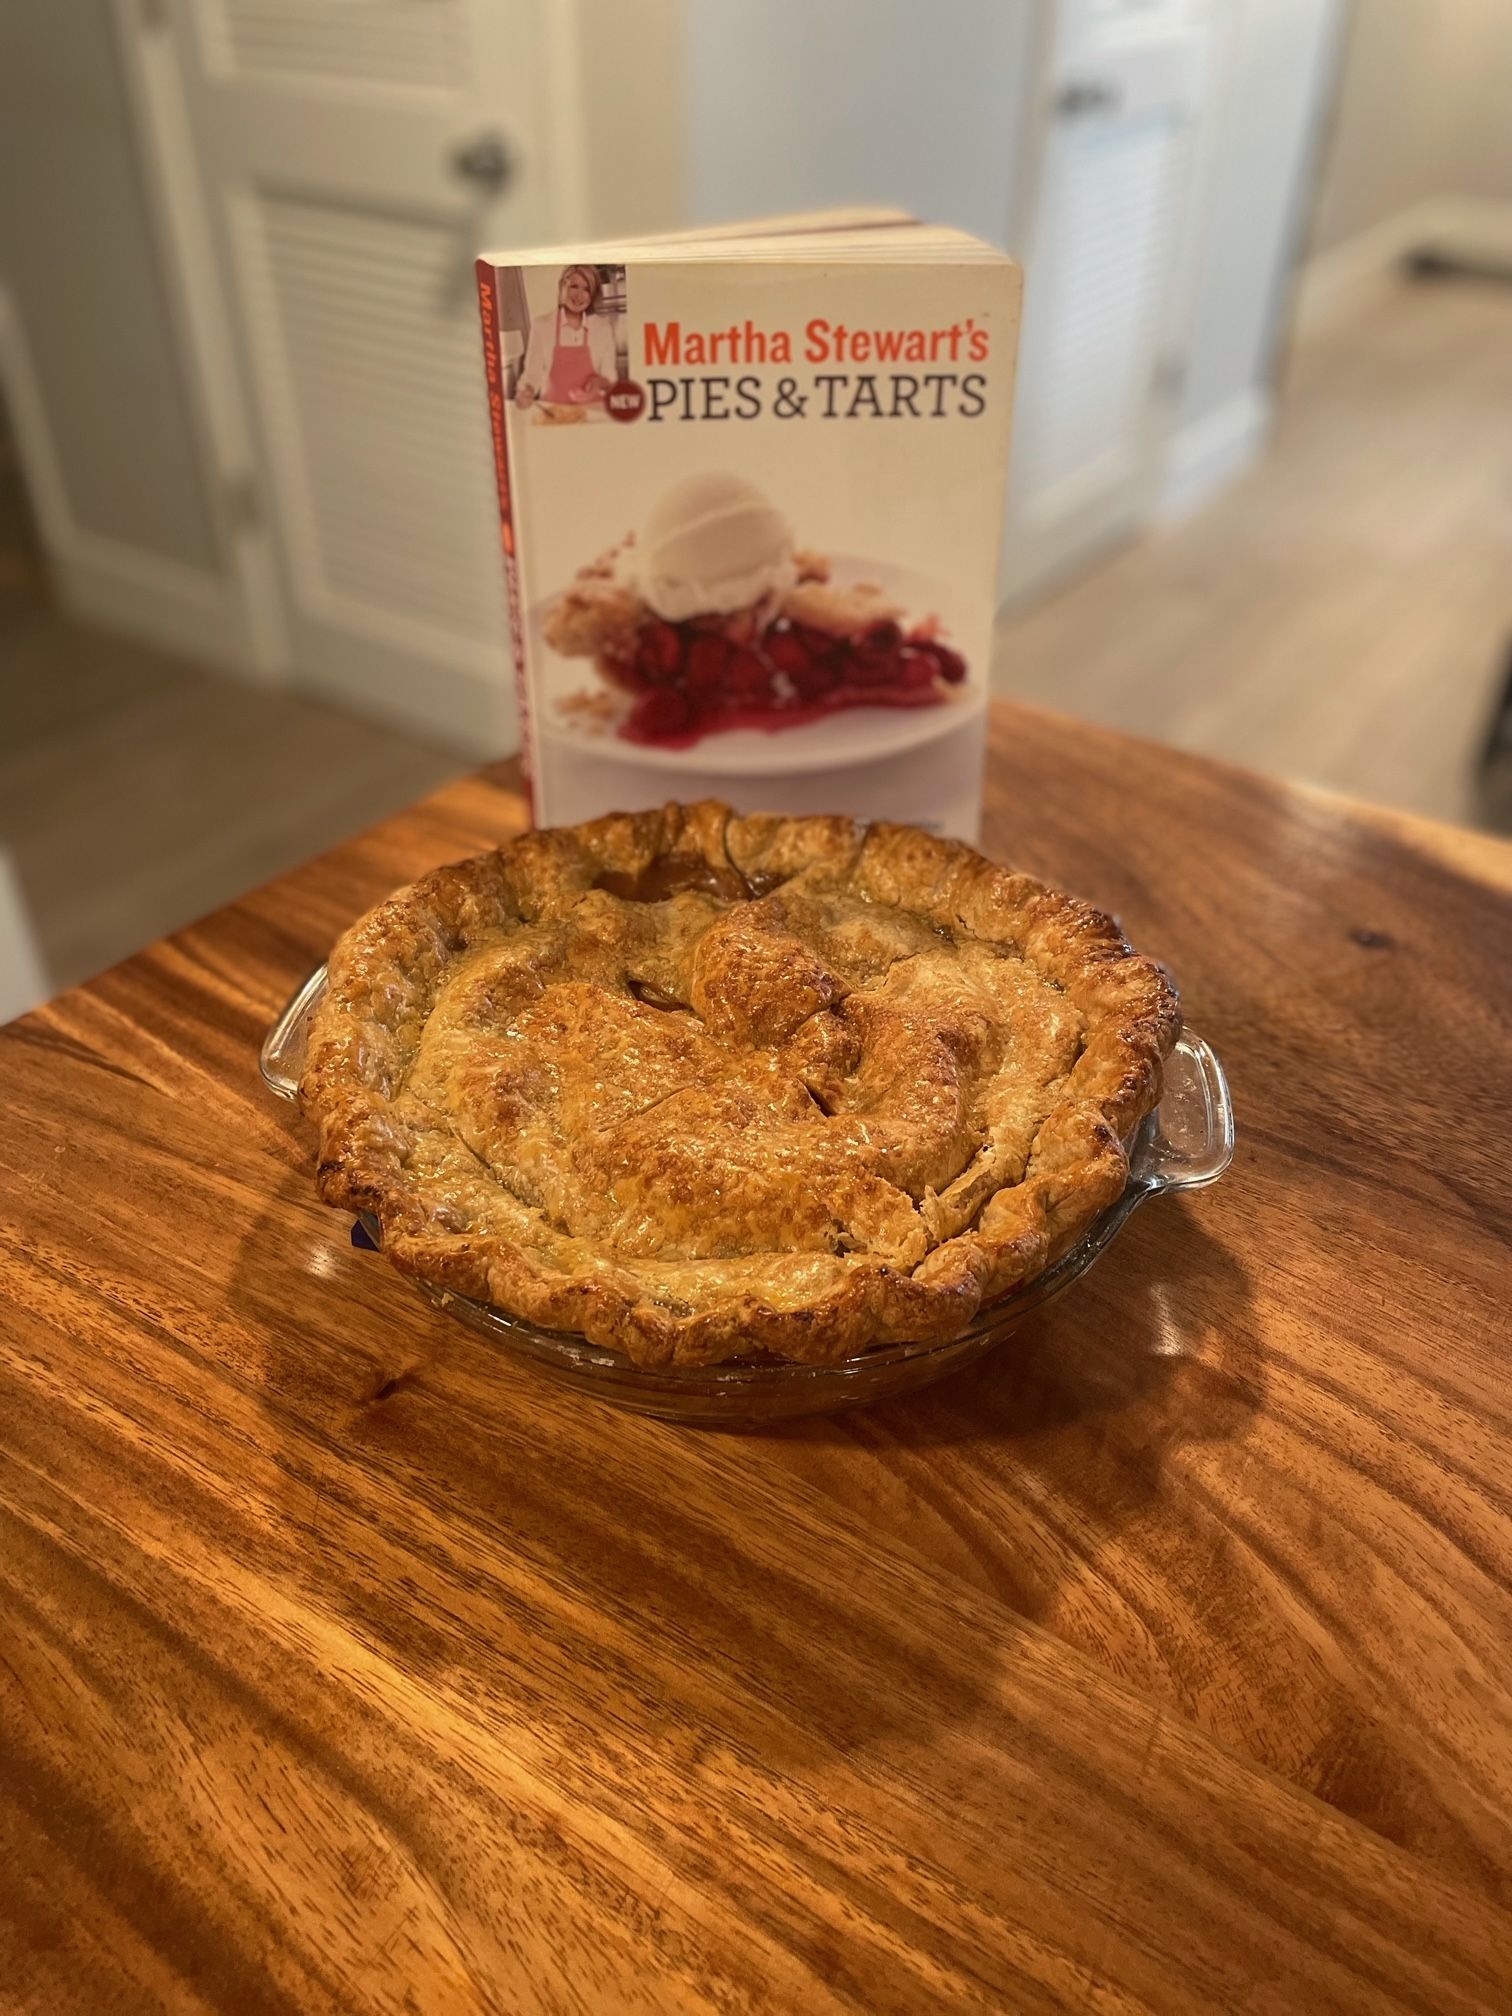 Photo of apple pie with Martha Stewart New Pies and Tarts cookbook